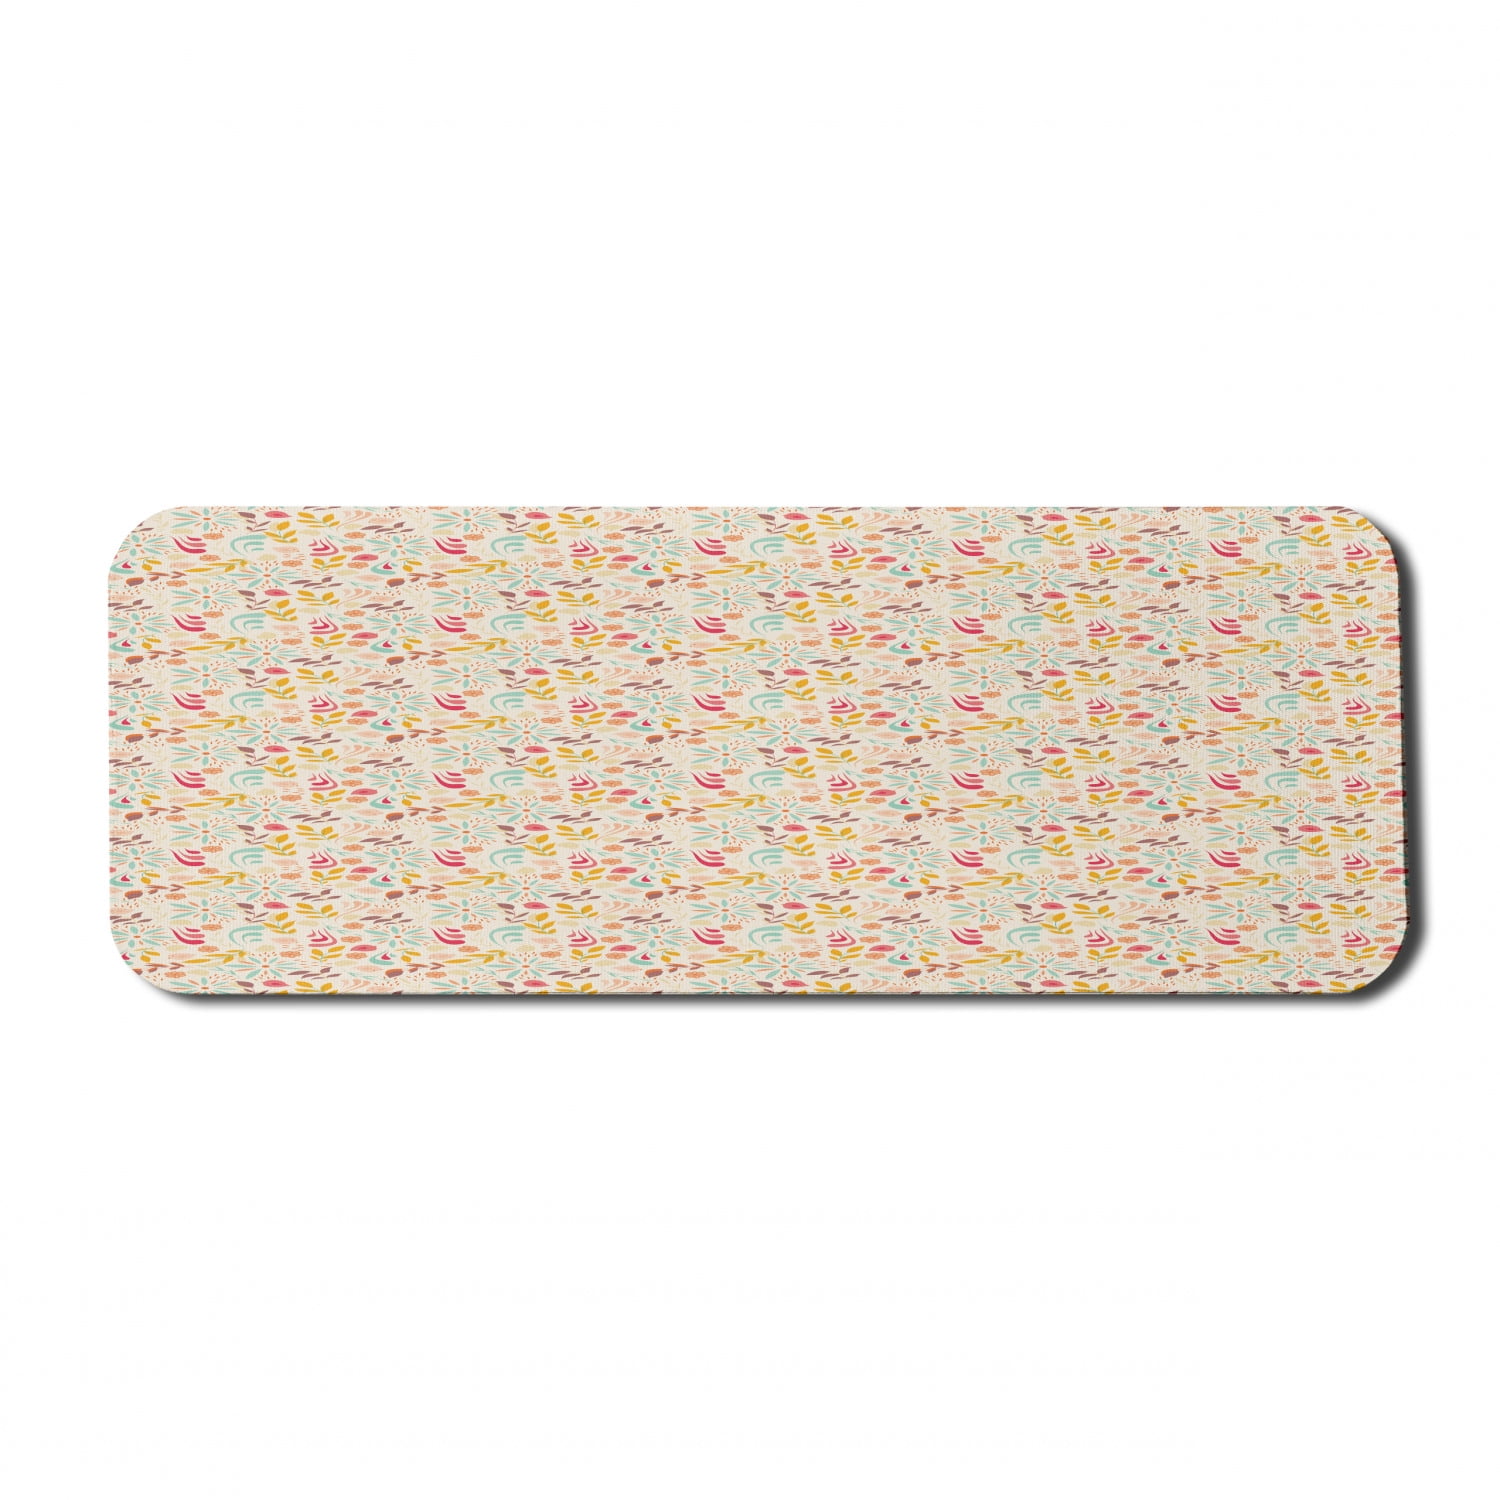 Floral Computer Mouse Pad, Botanical in Earth Tones Spring Vibes, Rectangle  Non-Slip Rubber Mousepad Large, 31